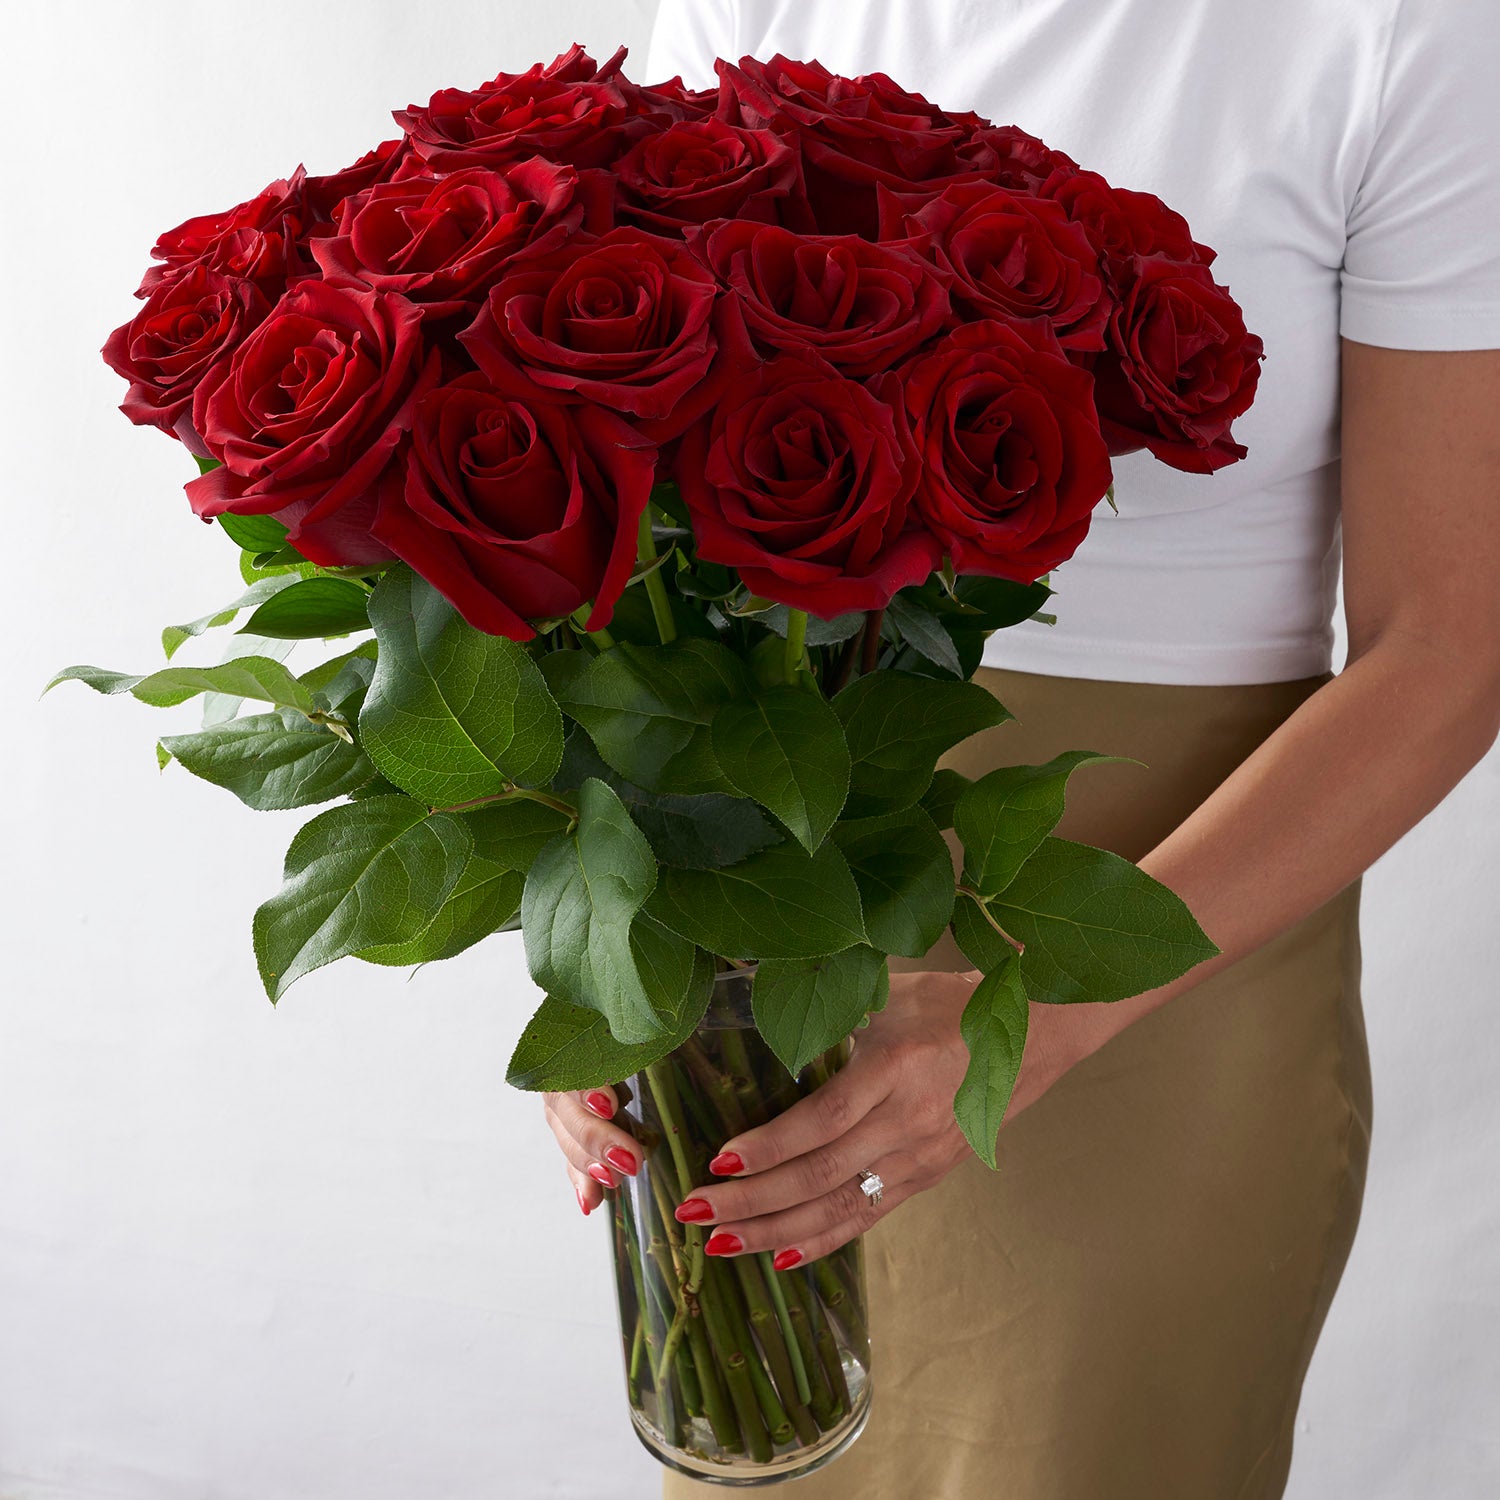 Woman holding glass vase full of red roses with greenery.